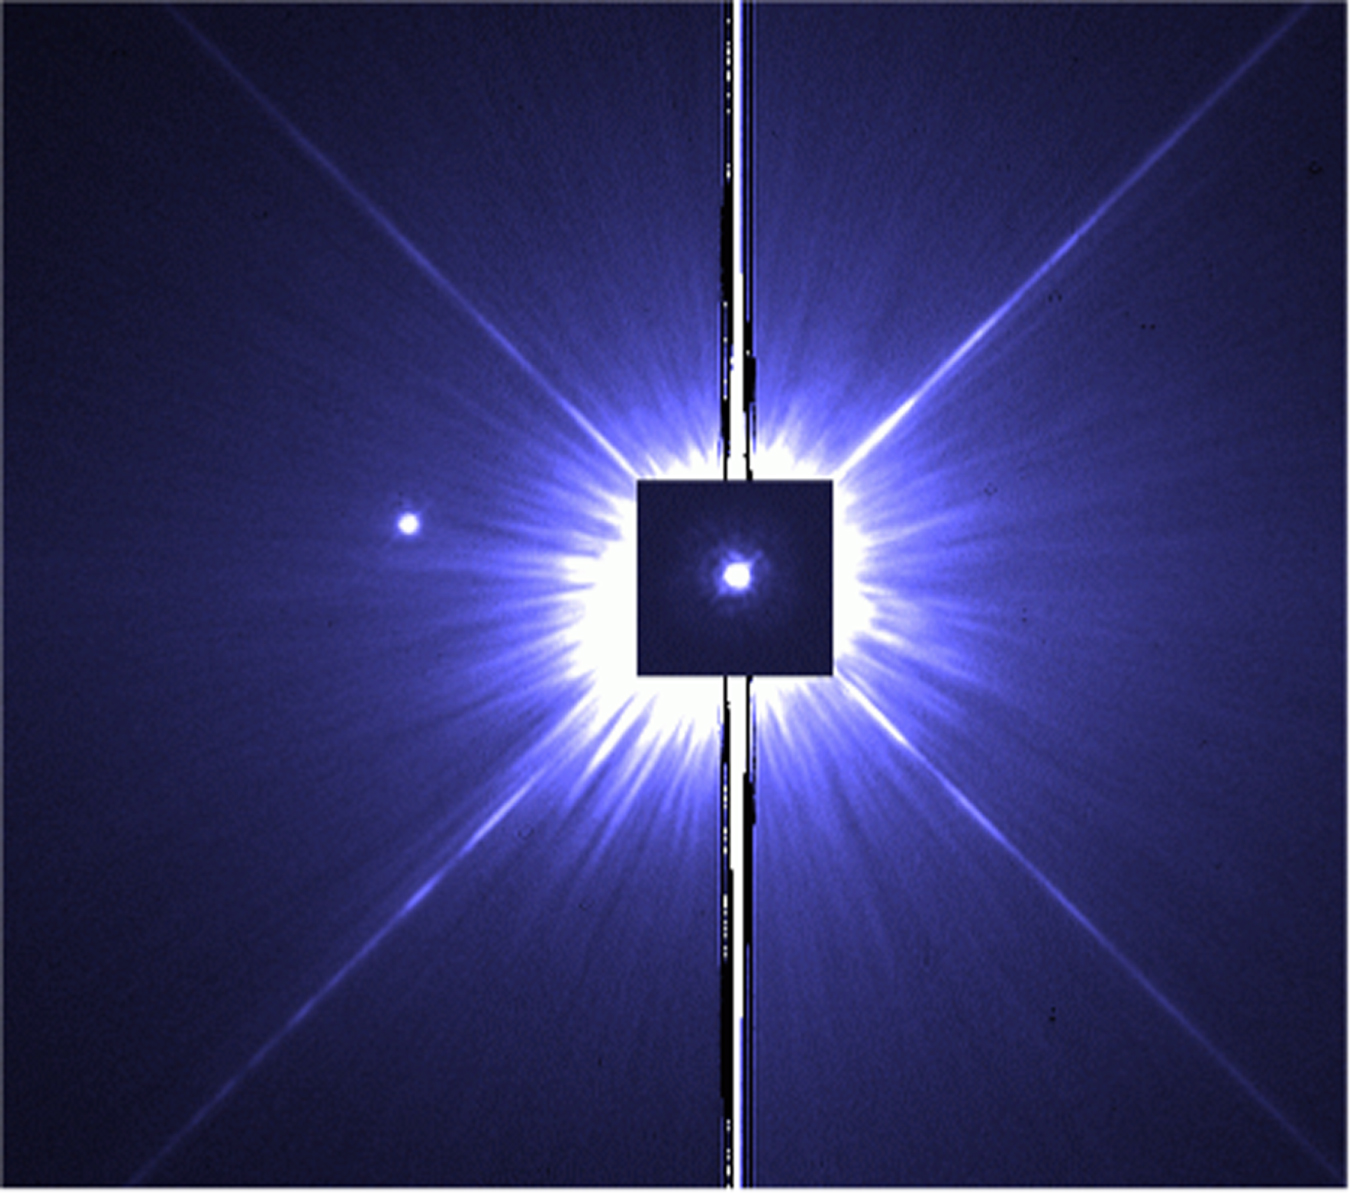 In this false-color, near-UV Hubble image, a 0.14-s exposure of Procyon A is superposed on a 100-s exposure of Procyon B (in which Procyon A is saturated). The subgiant and white dwarf orbit each other with a maximum angular separation of less than 5”, creating a distinct challenge for astronomers to observe. [Bond et al. 2015]